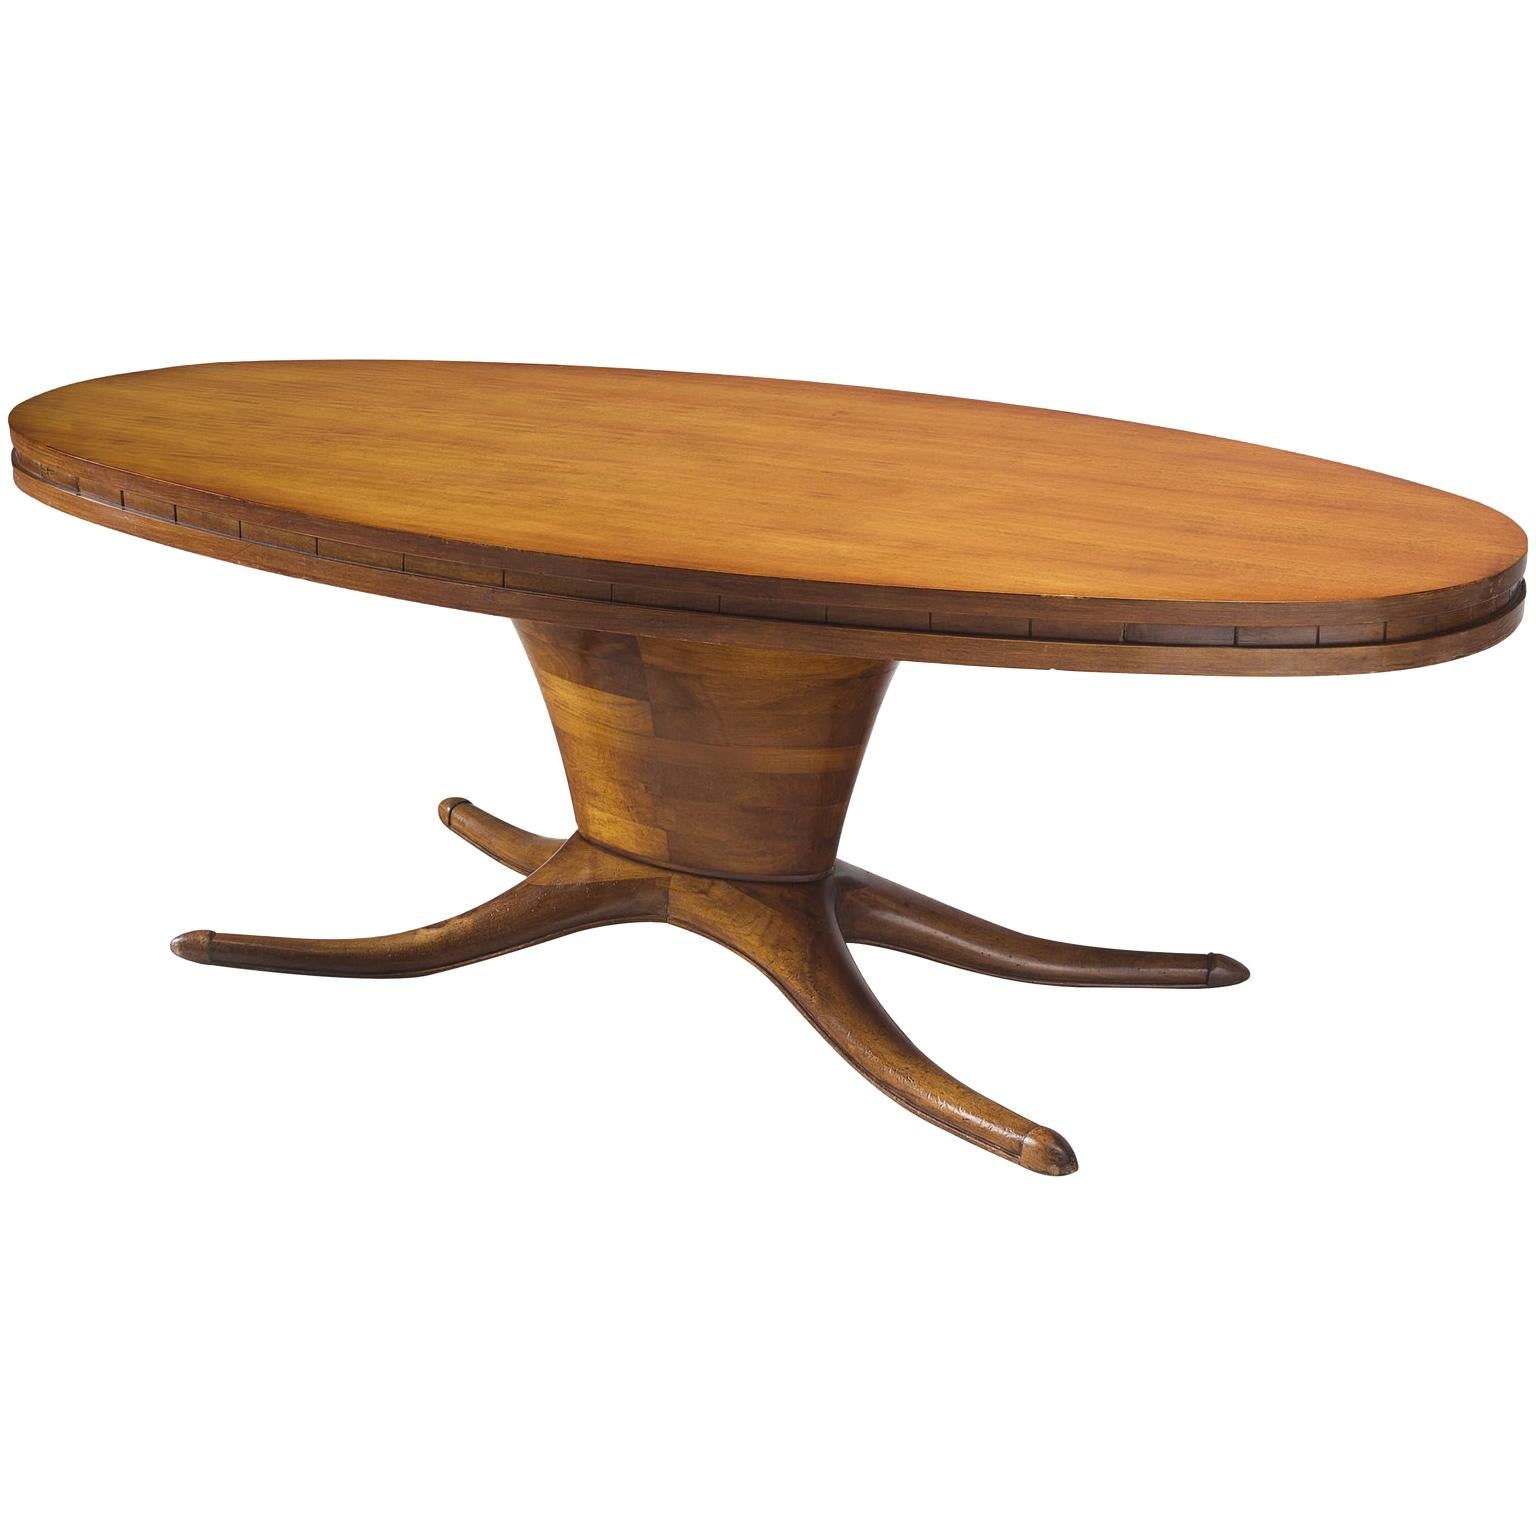 Midcentury Oval Centre Table in Walnut, circa 1950